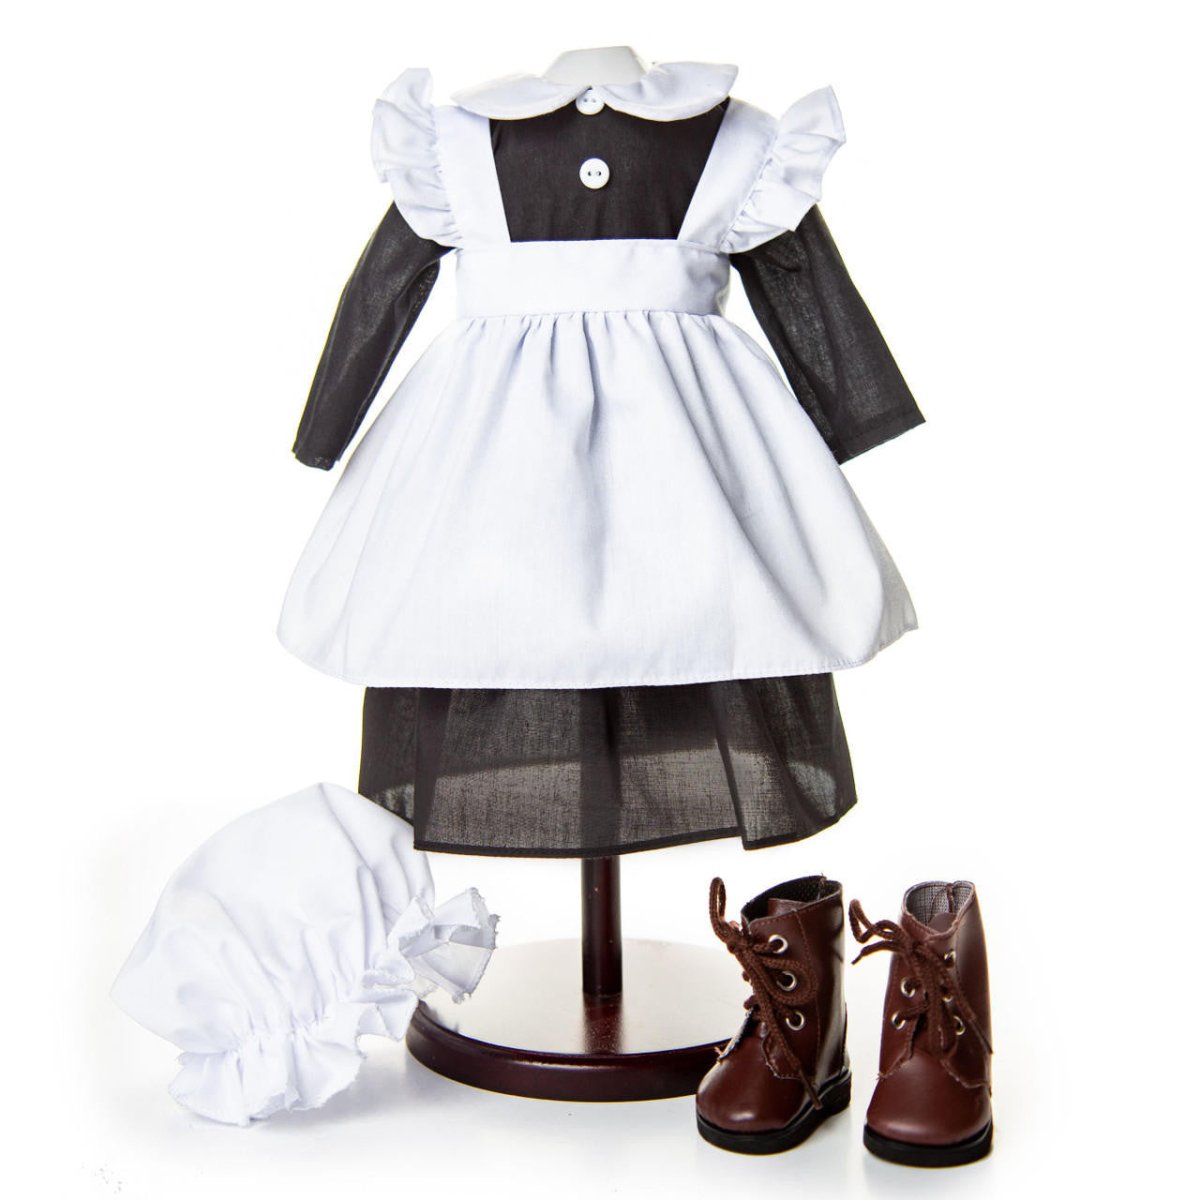 5 Piece Kitchen Maid Clothes Outfit with Boots for 18" Dolls Bundle - Simon's Collectibles